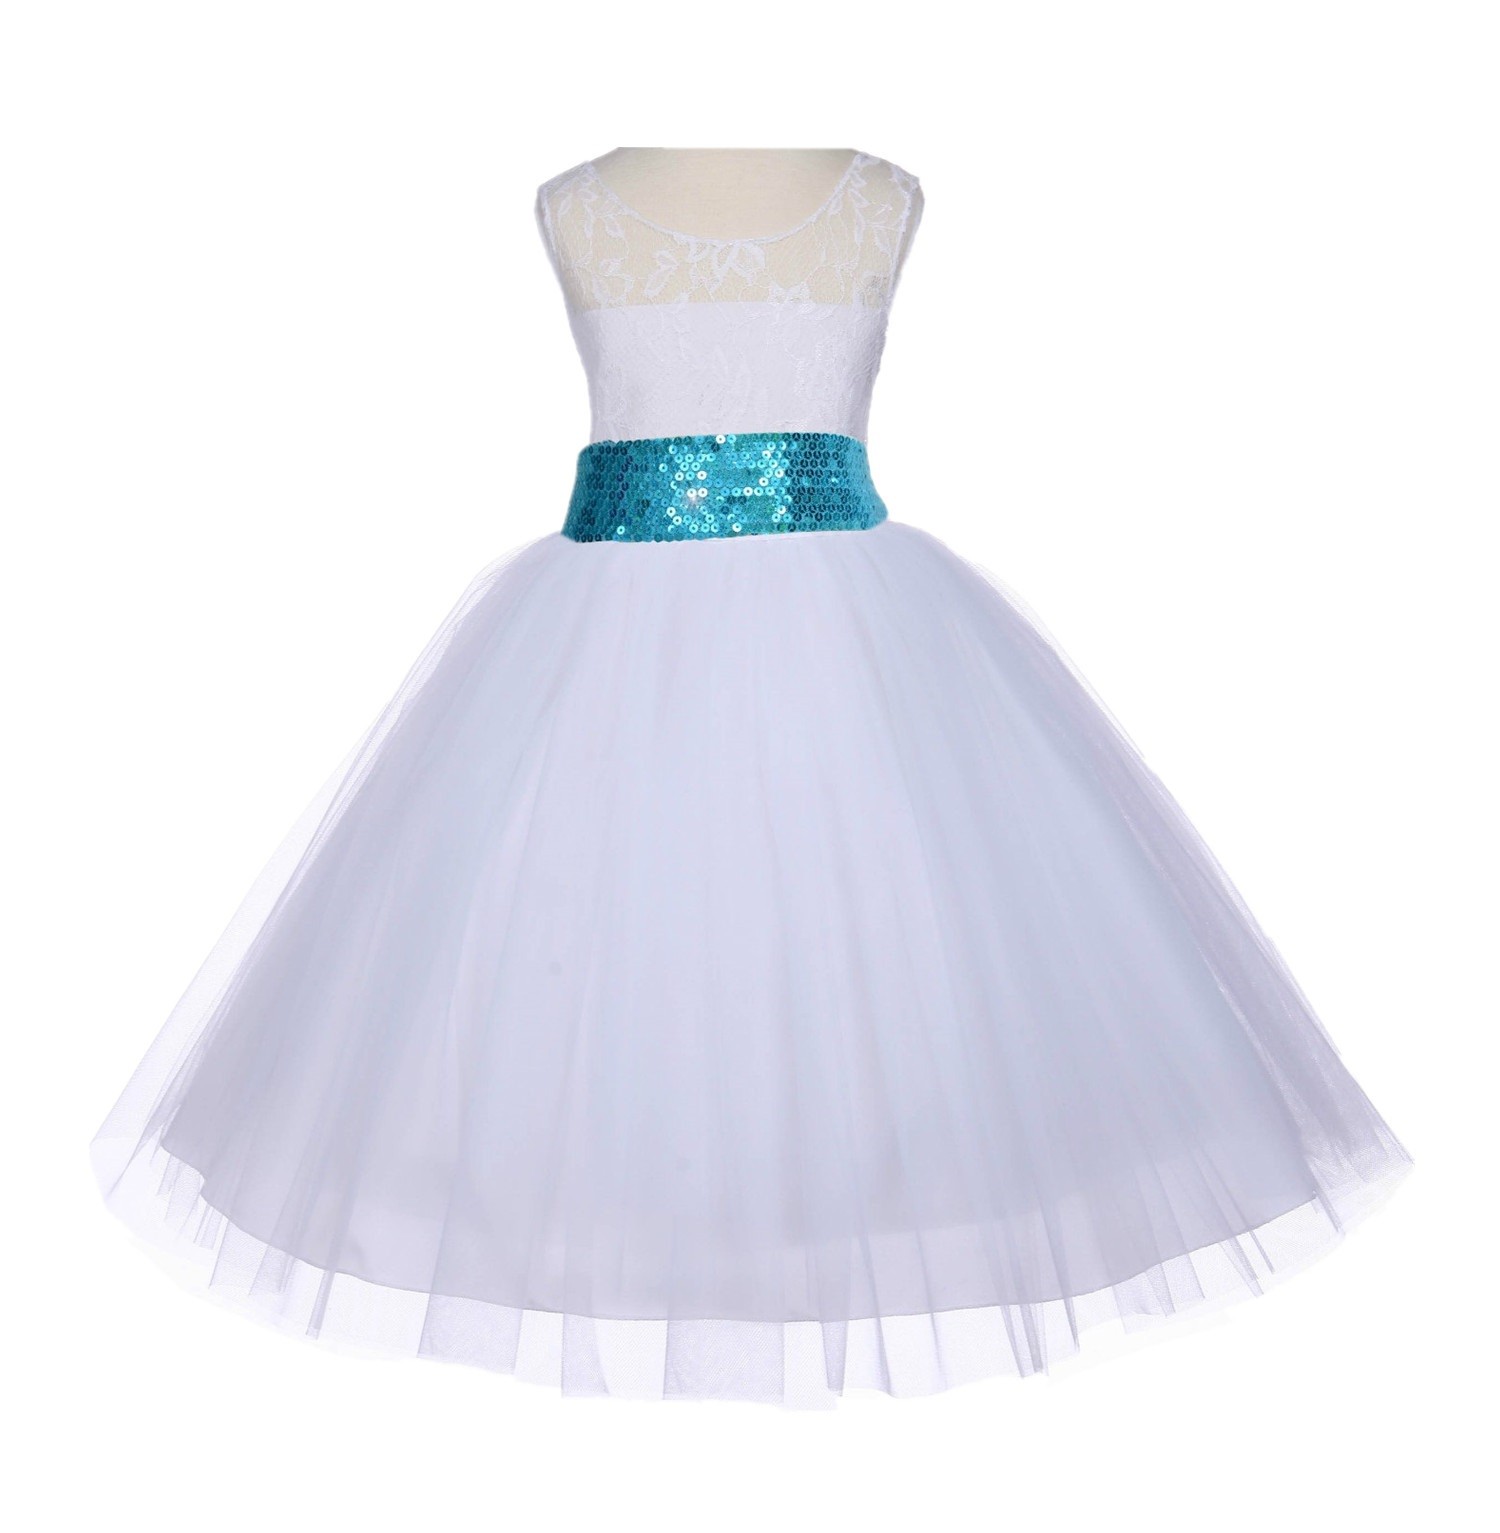 White Floral Lace Bodice Tulle Turquoise Sequin Flower Girl Dress 153mh